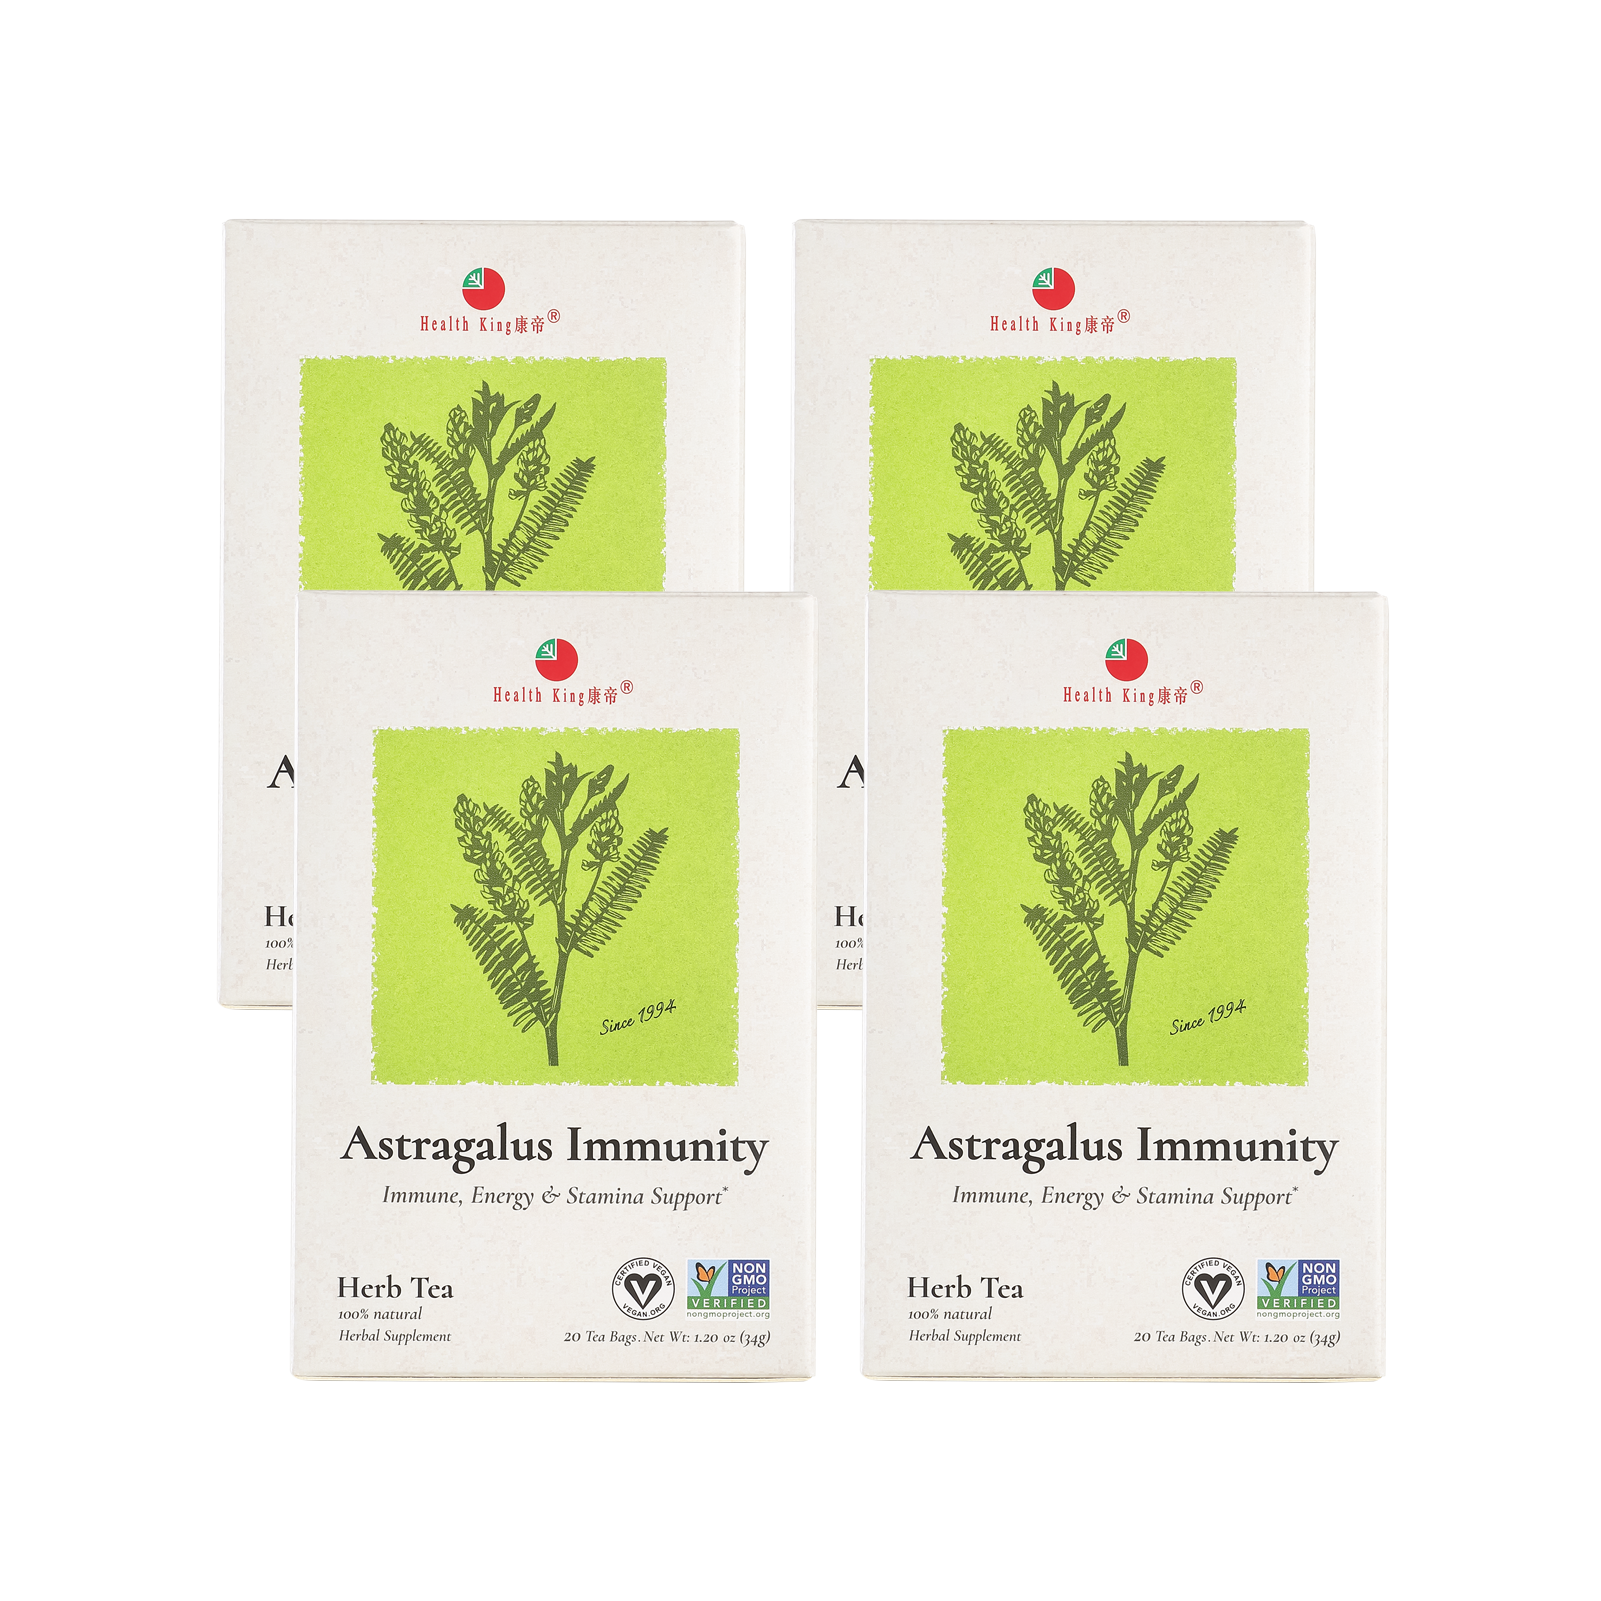 Astragalus Immunity Herb Tea packets displayed together